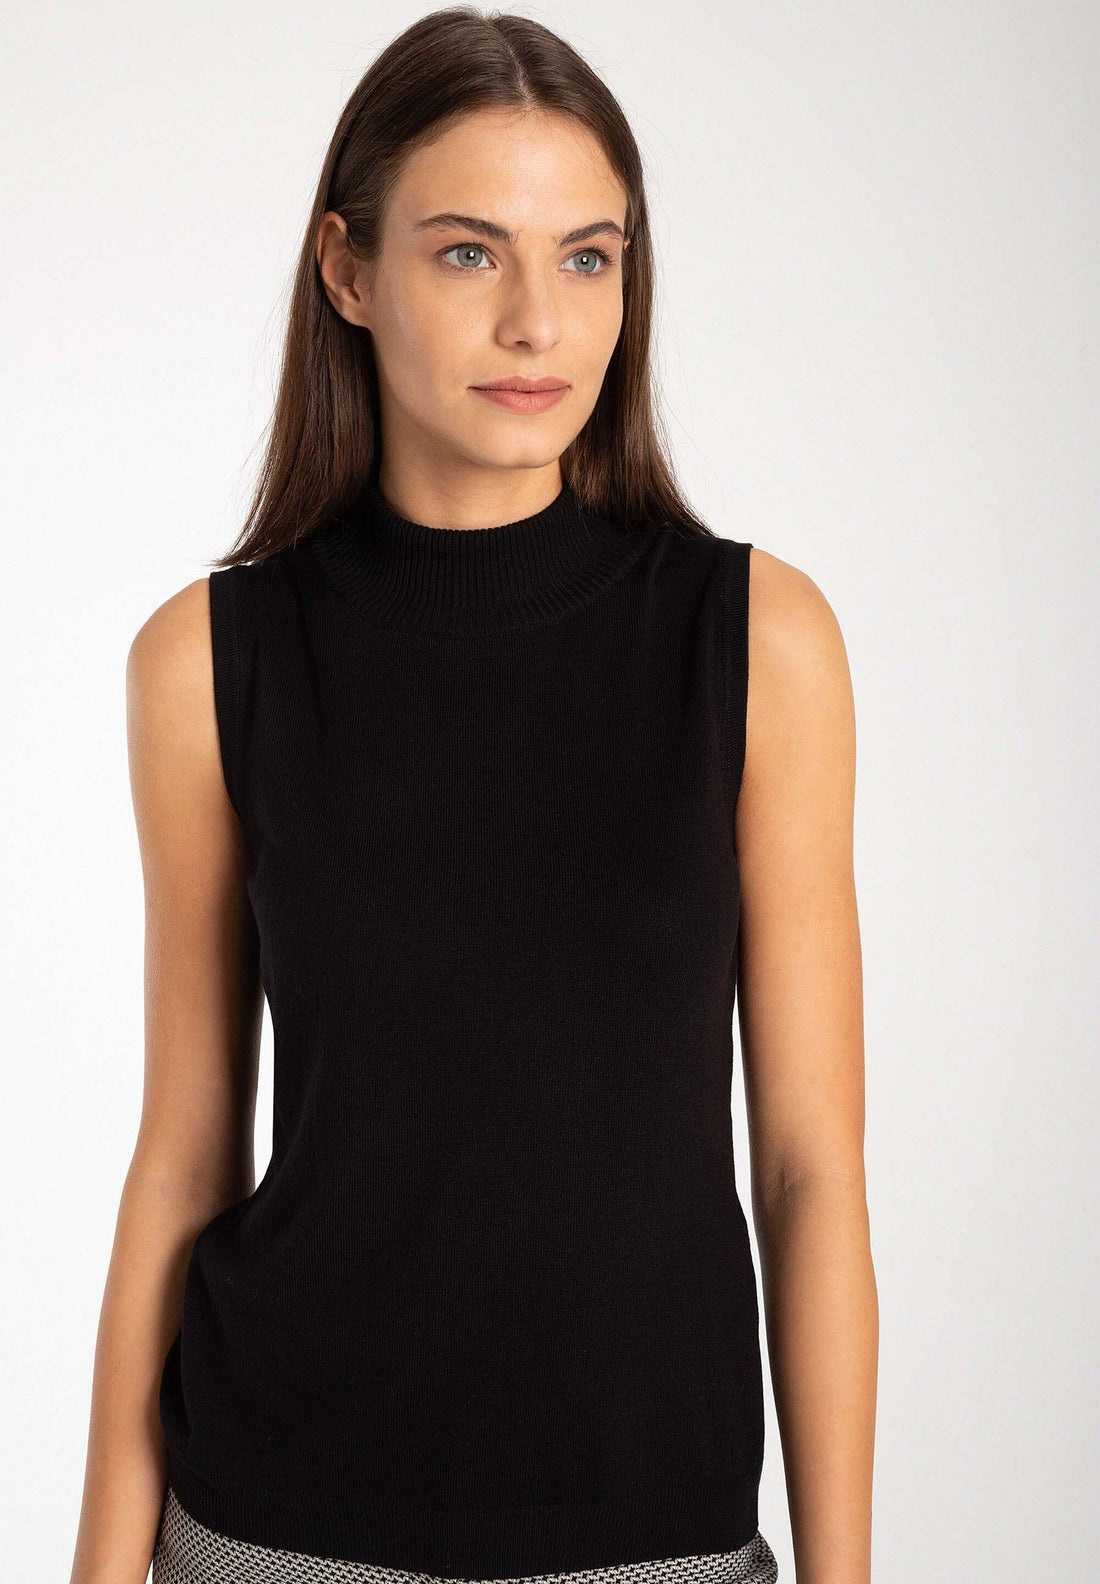 Black Sleeveless Top With High Neck_31081053_0790_01